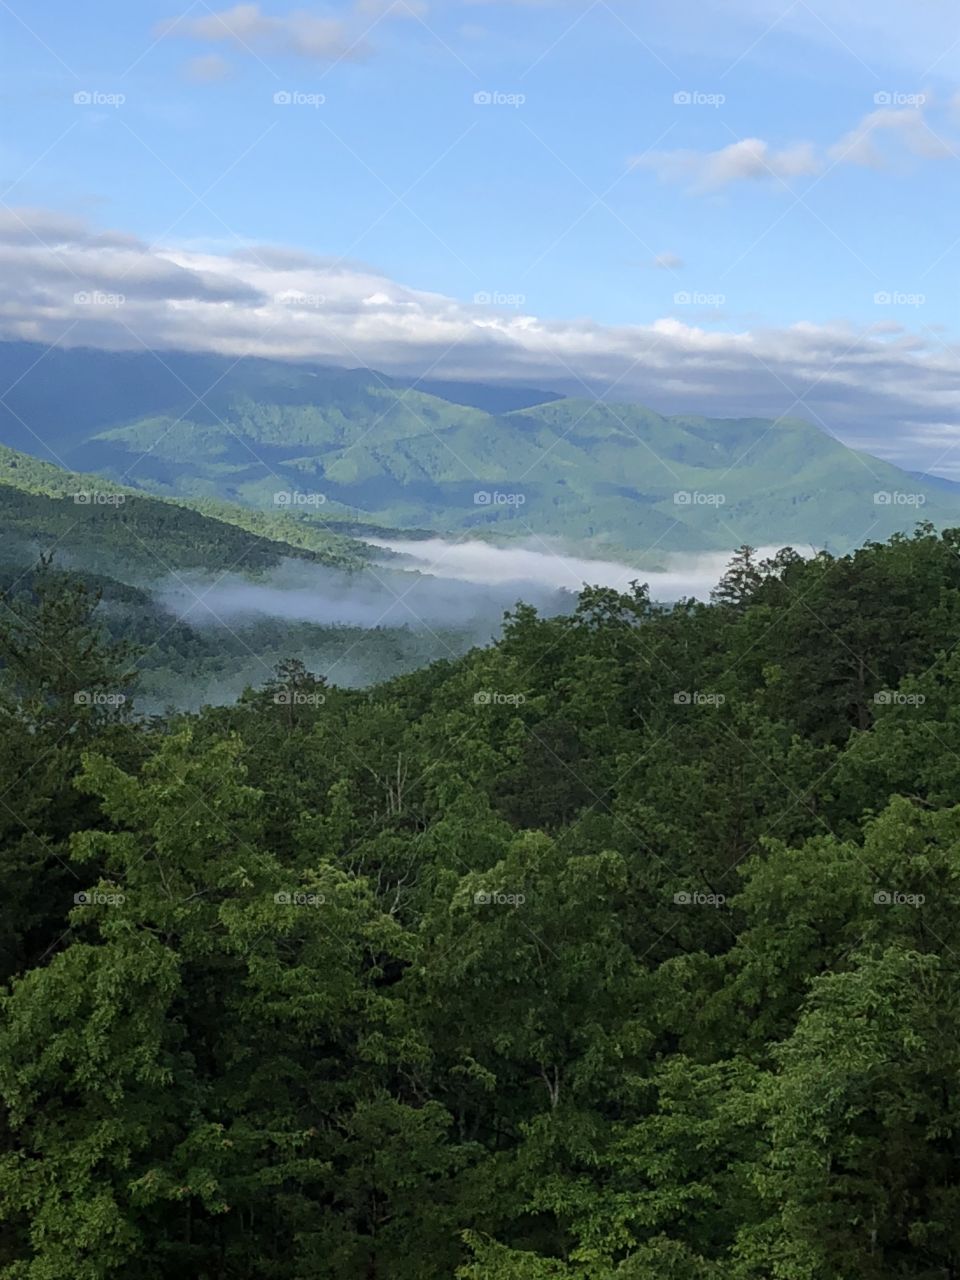 Smokey Mountains in Gatlinburg Tennessee at the end of May. 